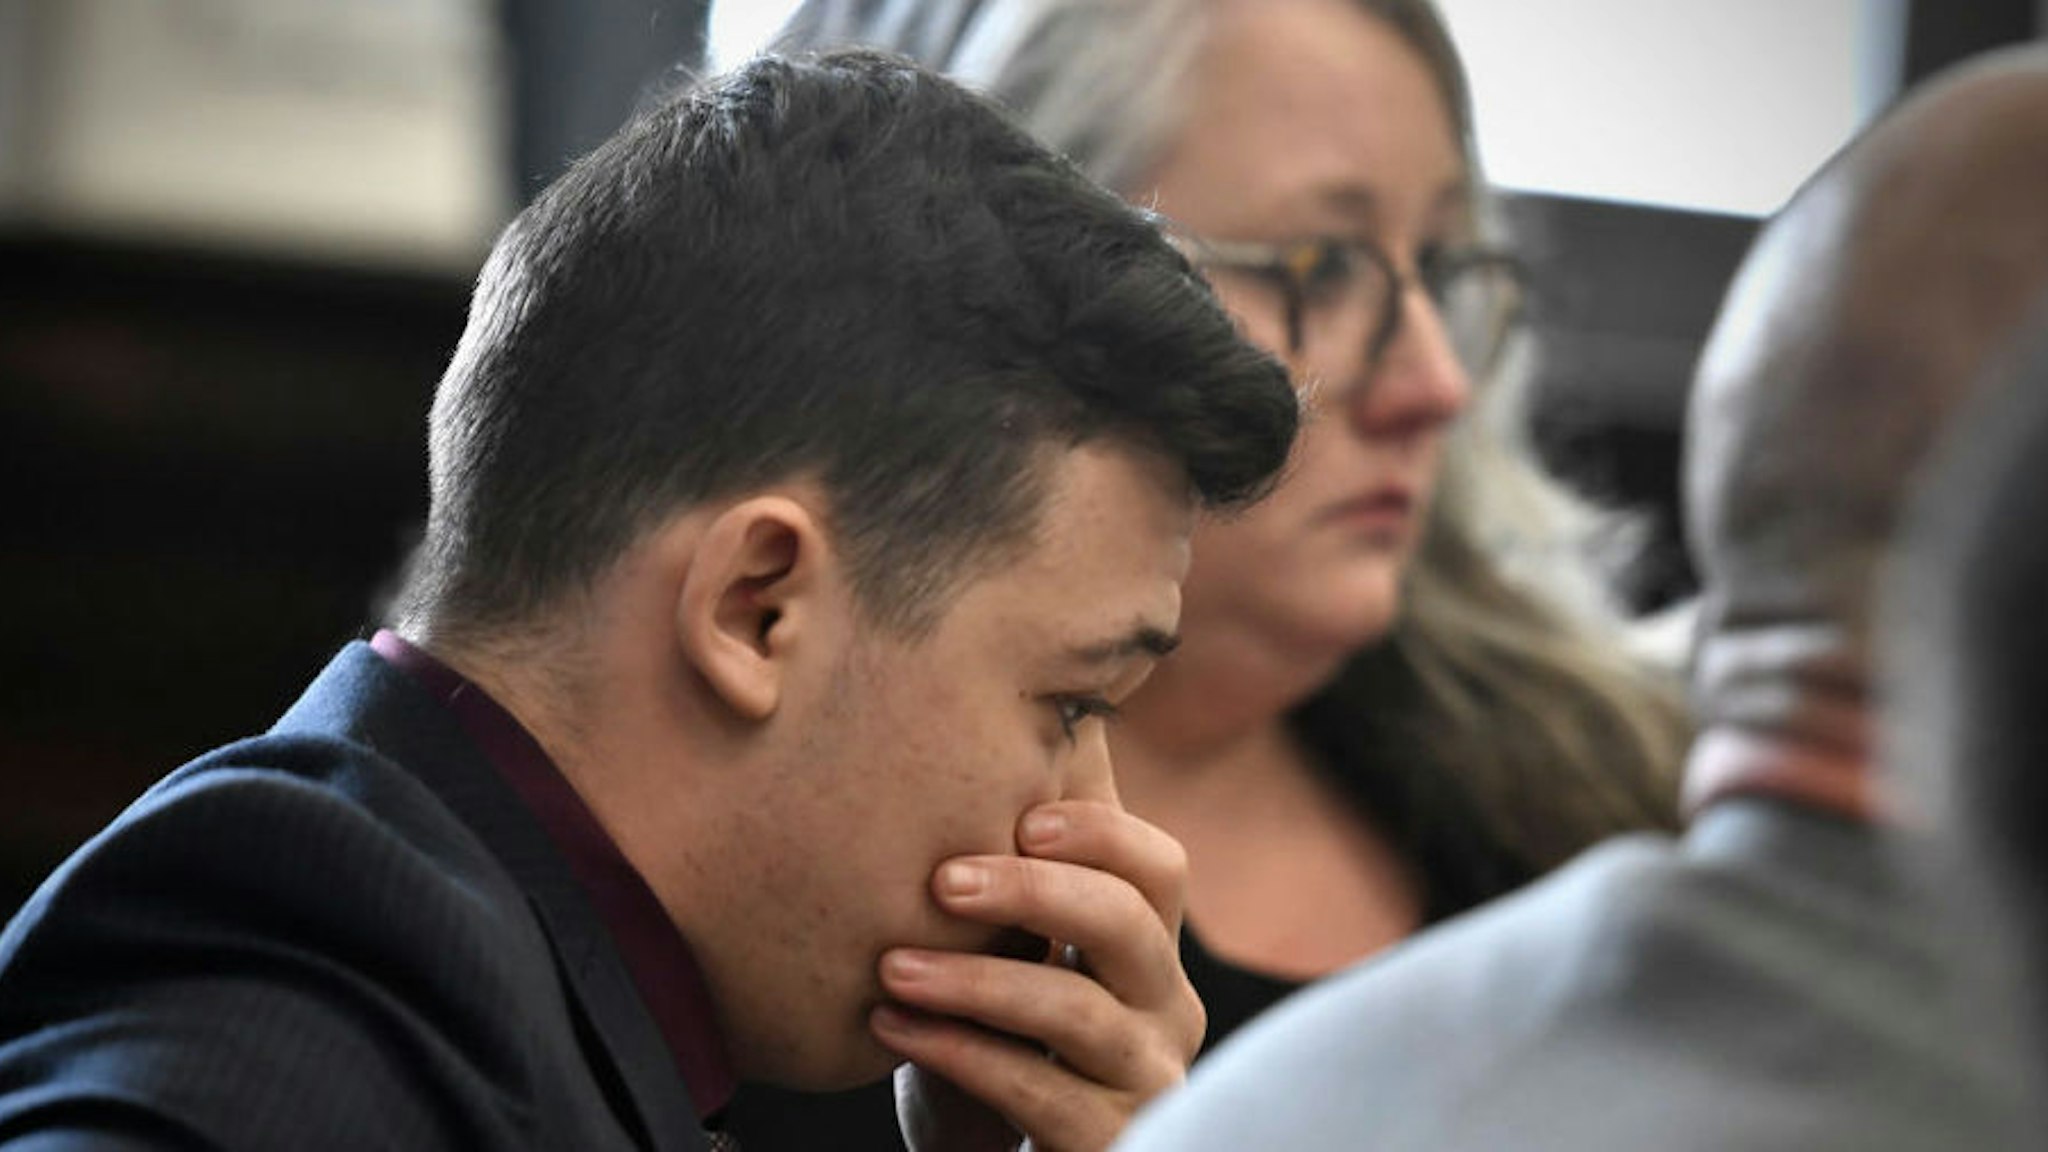 KENOSHA, WISCONSIN - NOVEMBER 19: Kyle Rittenhouse puts his hand over his face as he is found not guilty on all counts at the Kenosha County Courthouse on November 19, 2021 in Kenosha, Wisconsin. Rittenhouse was found not guilty of all charges in the shooting of three demonstrators, killing two of them, during a night of unrest that erupted in Kenosha after a police officer shot Jacob Blake seven times in the back while being arrested in August 2020. Rittenhouse, from Antioch, Illinois, claimed self-defense who at the time of the shooting was armed with an assault rifle.